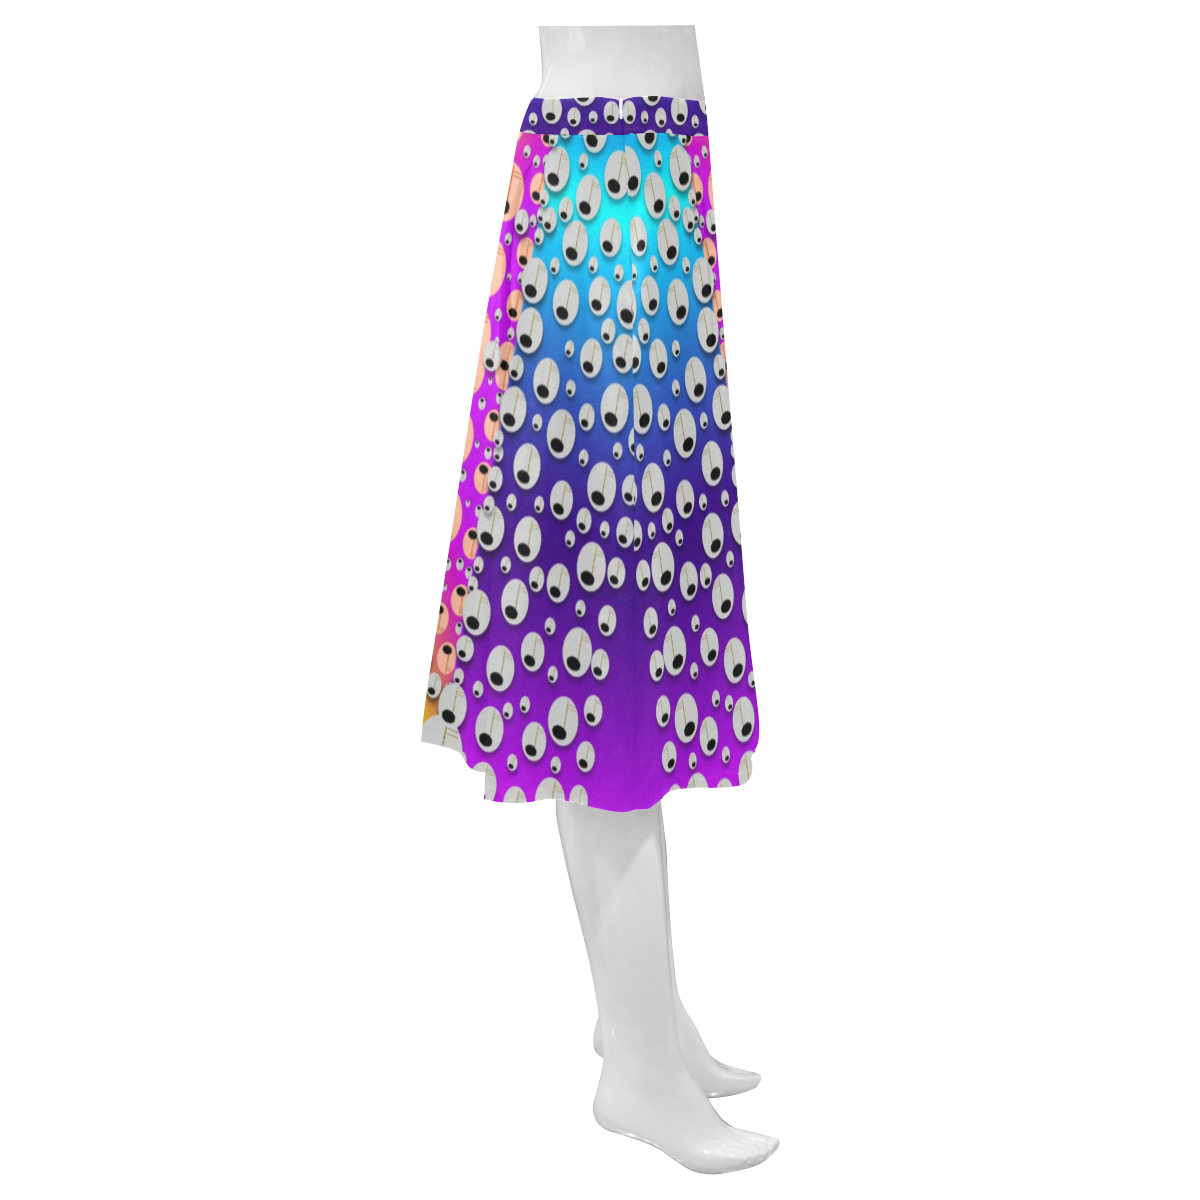 Music Tribute In the sun Peace and Popart Mnemosyne Women's Crepe Skirt (Model D16)